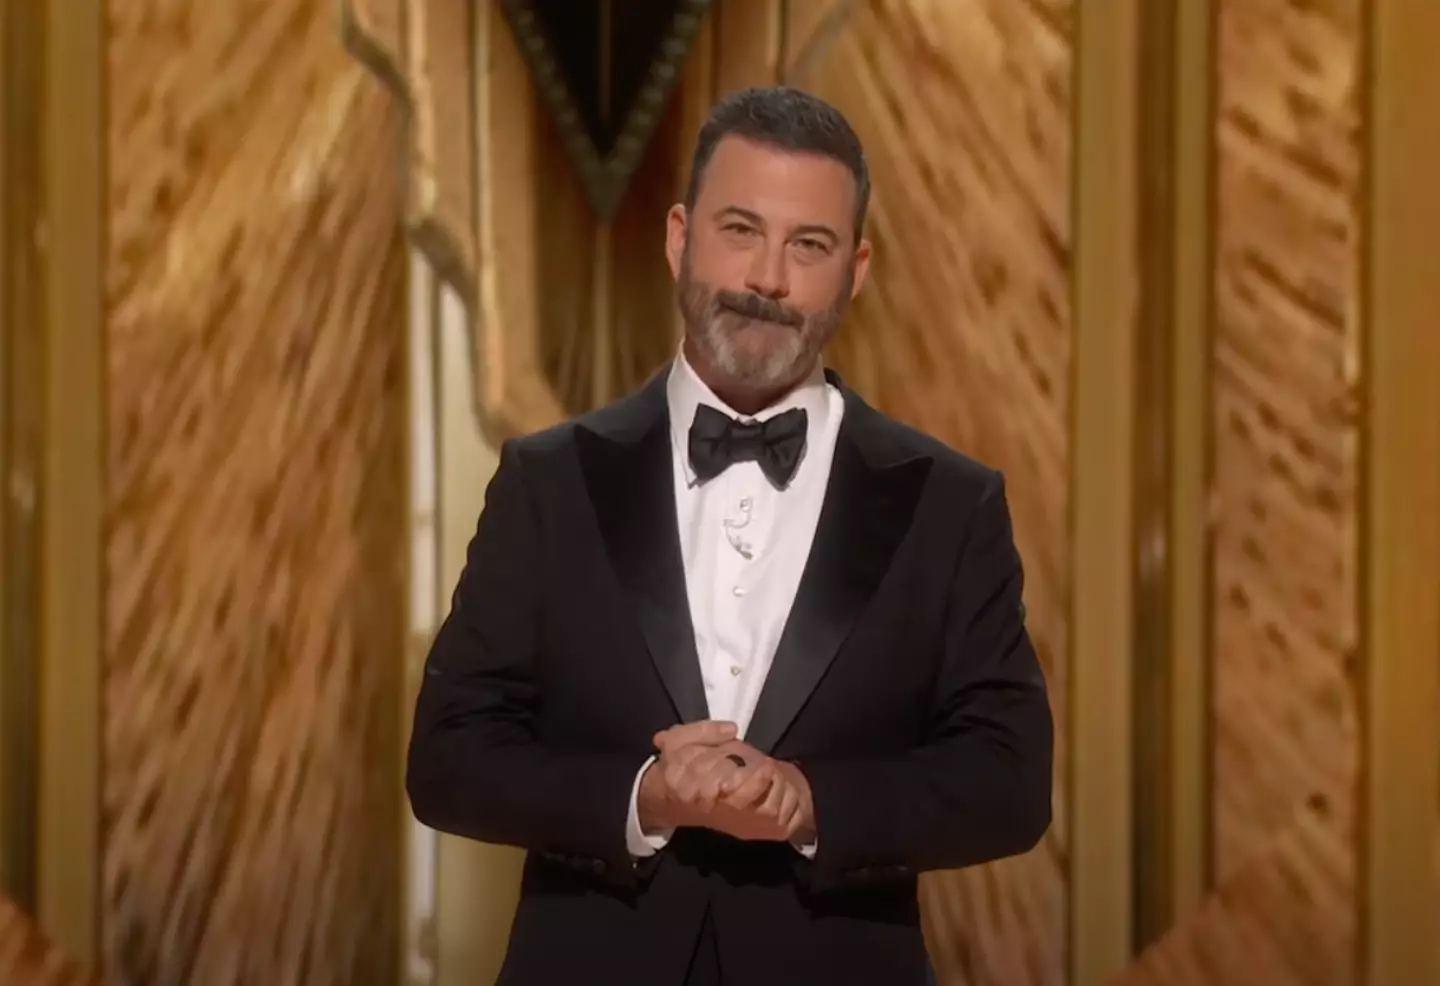 Kimmel made a brief quip about Cruise and Scientology.